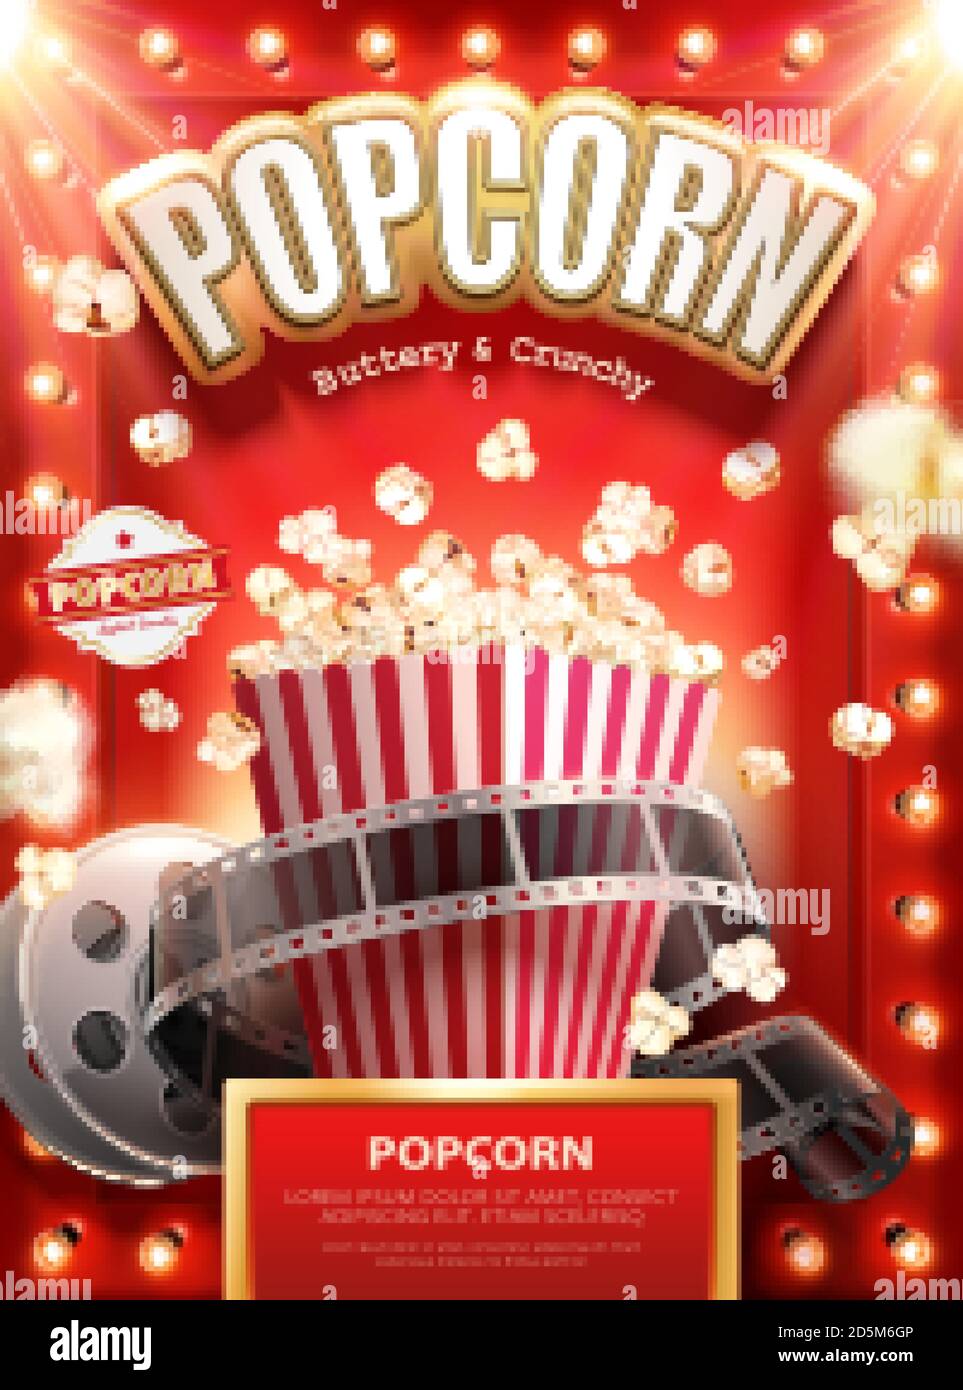 Classic buttery and crunchy popcorn ads with film roll on red background, 3d illustration Stock Vector